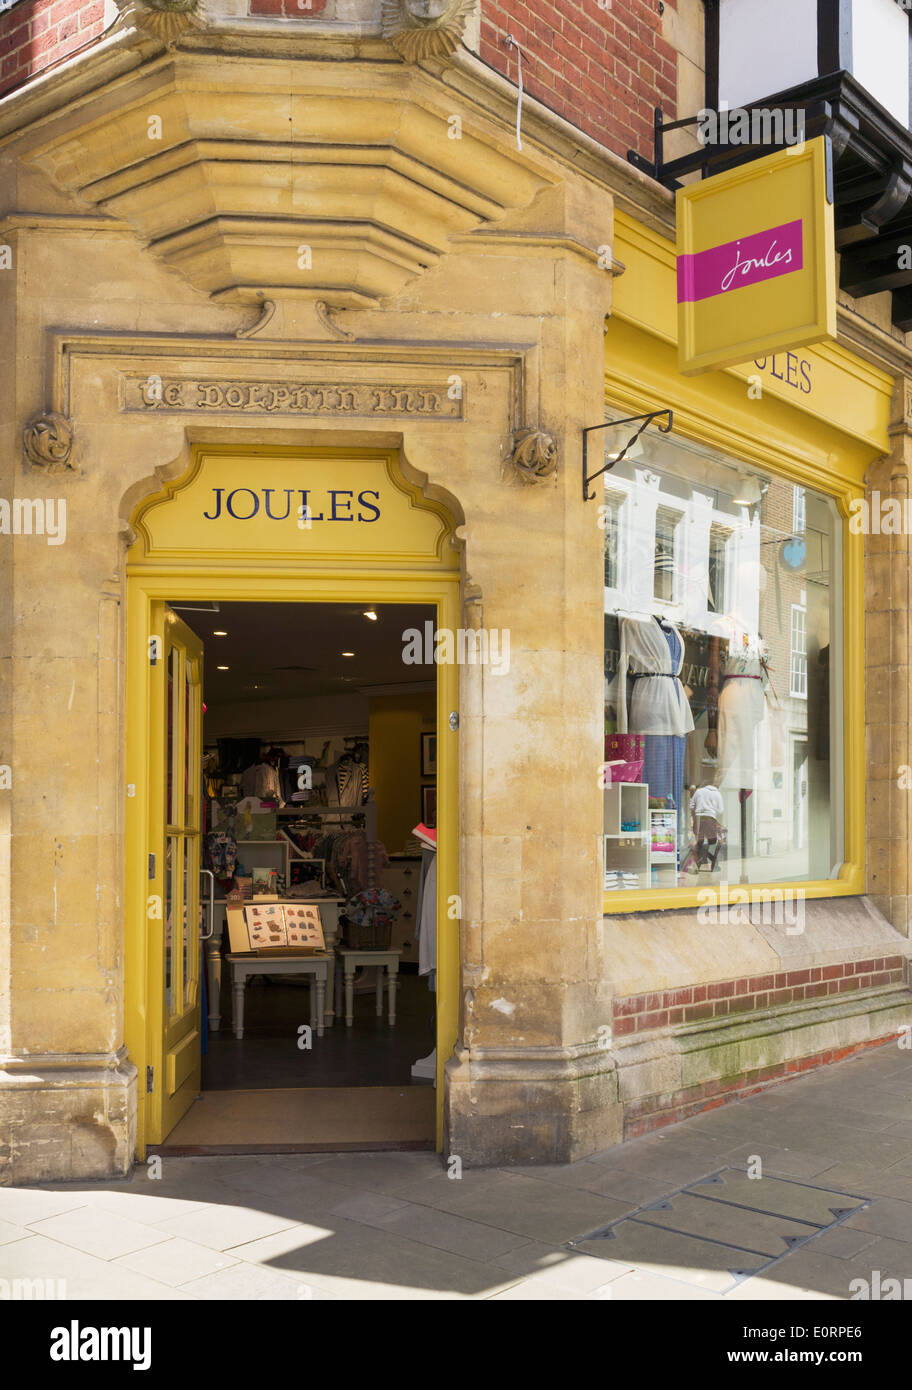 Joules clothing chain store, England, UK Banque D'Images